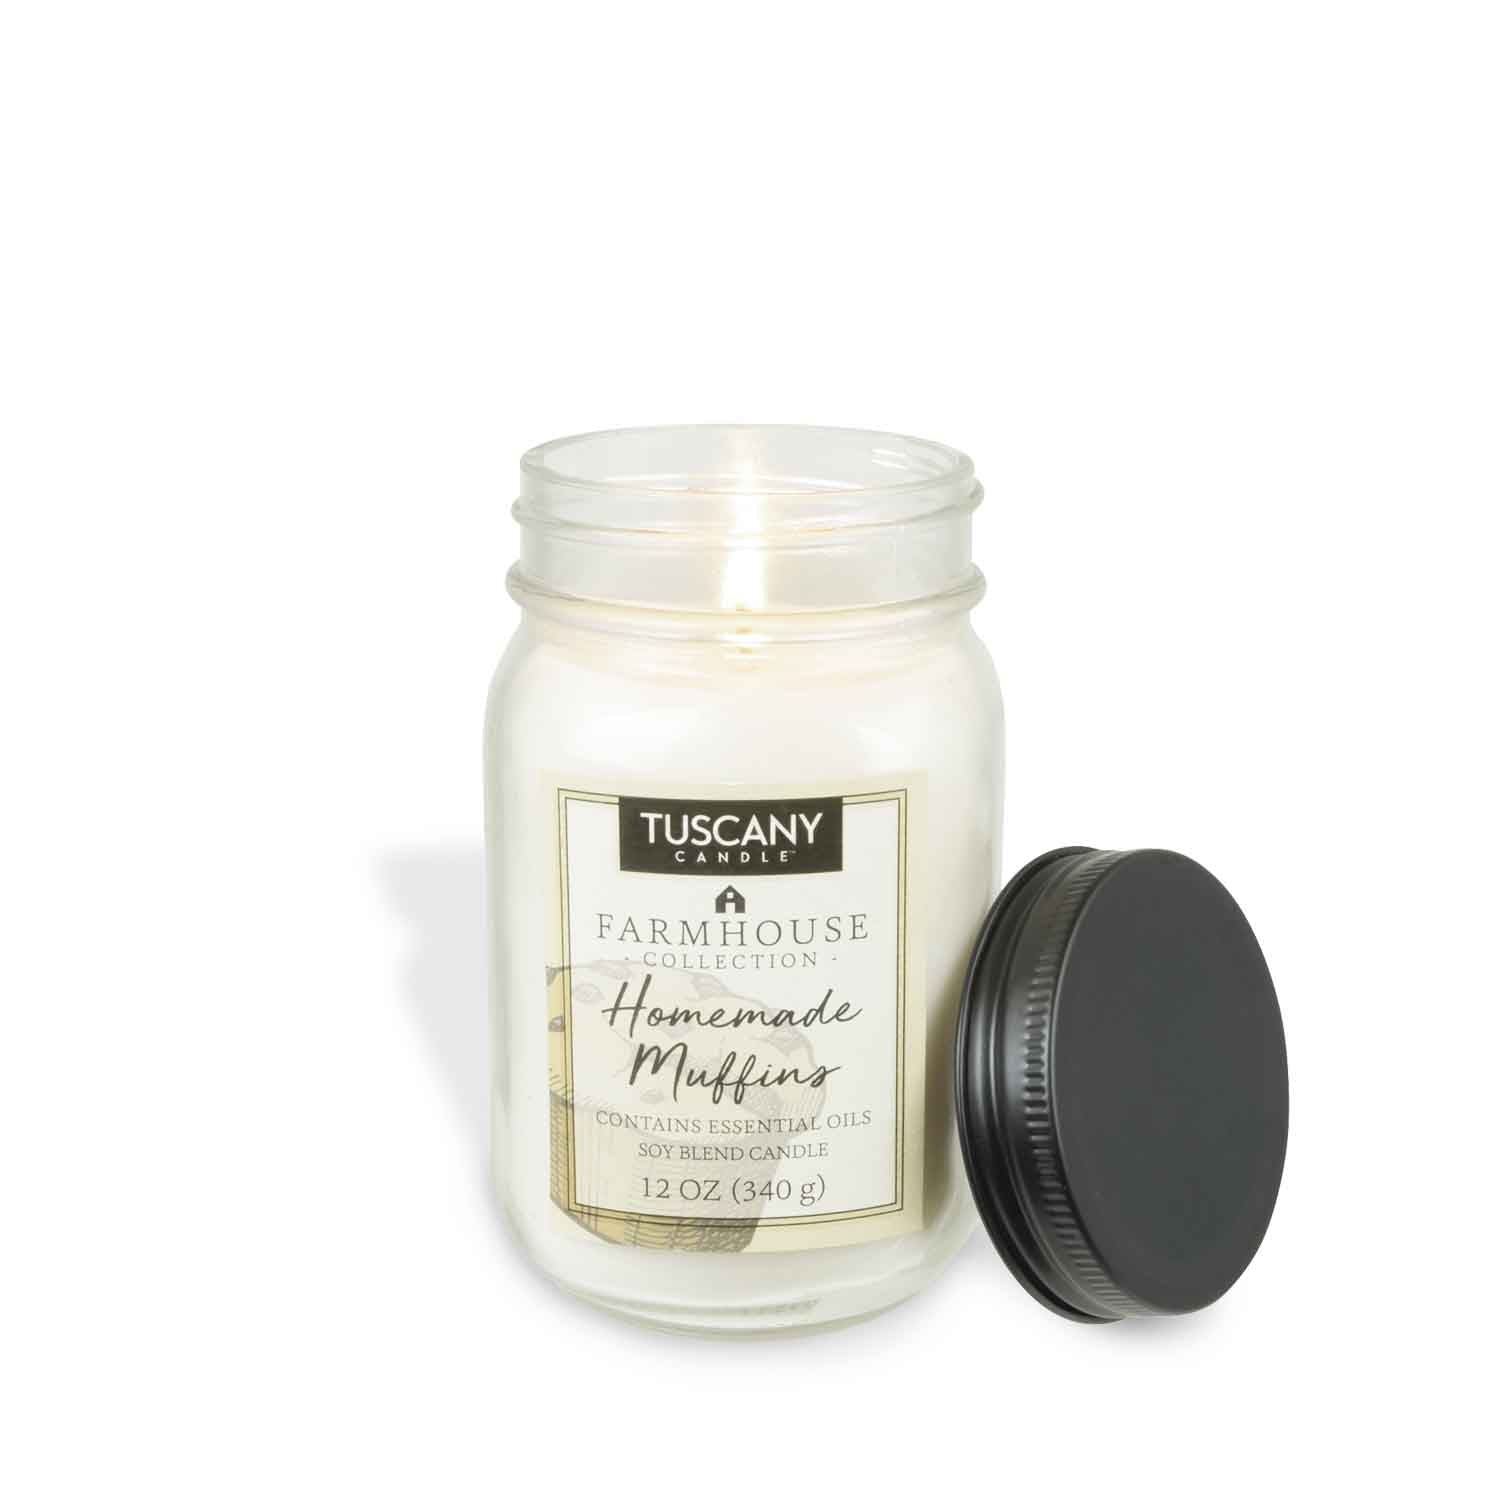 A Tuscany Candle® EVD Farmhouse jar with a lid and a Homemade Muffins Scented Jar Candle (12 oz) – Farmhouse Collection inside.